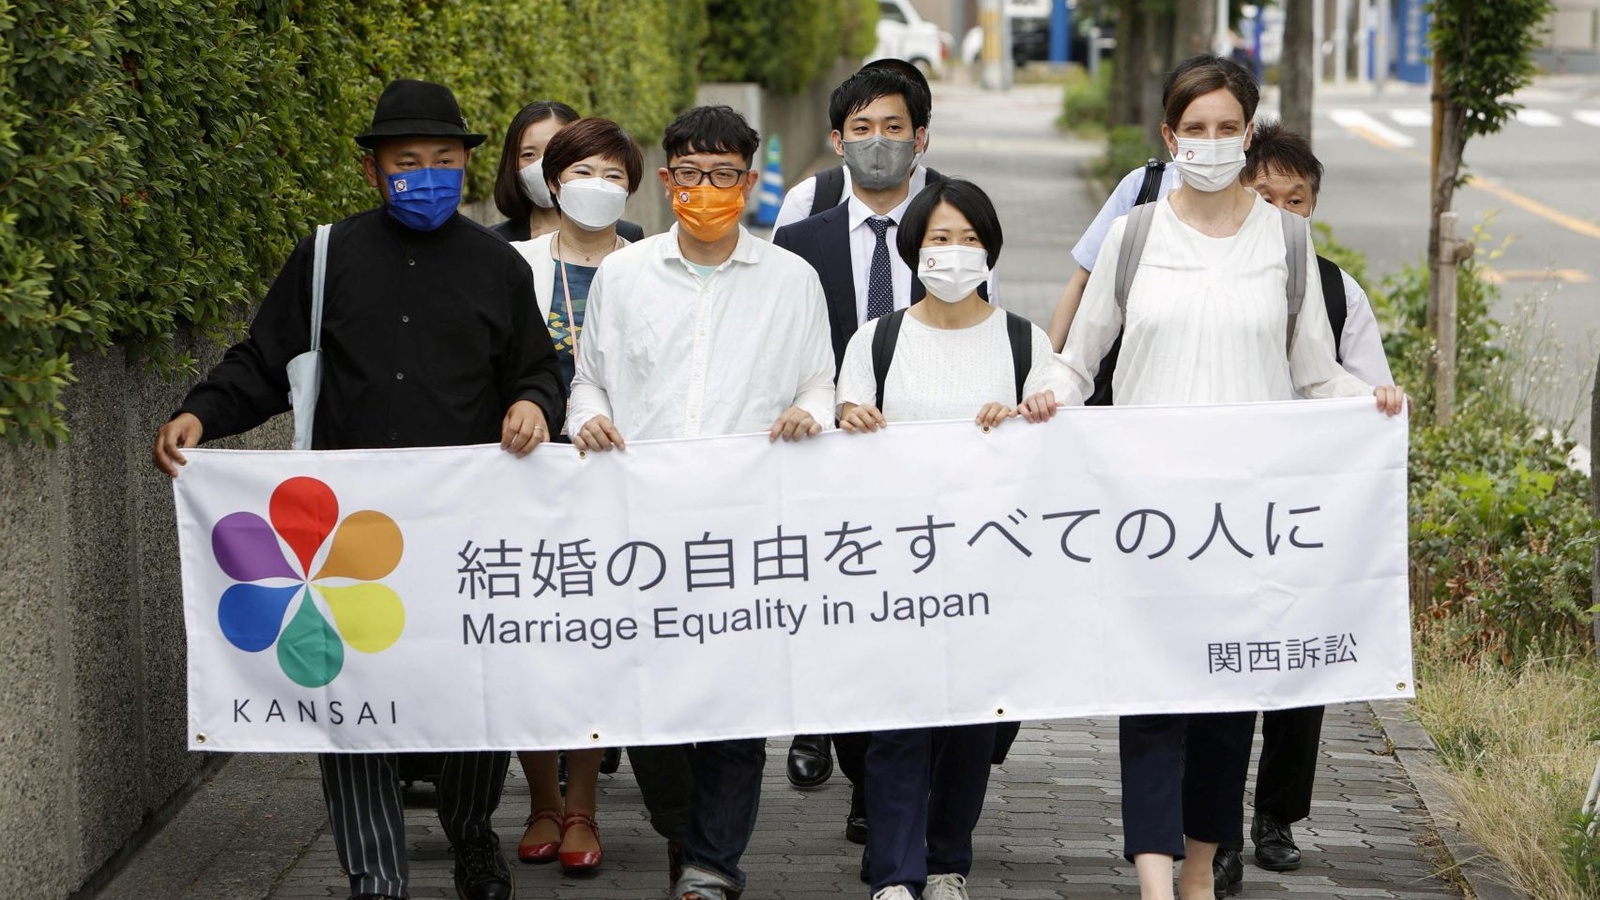 Mixed Messages From Japanese Courts on Same-Sex Marriage Council on Foreign Relations